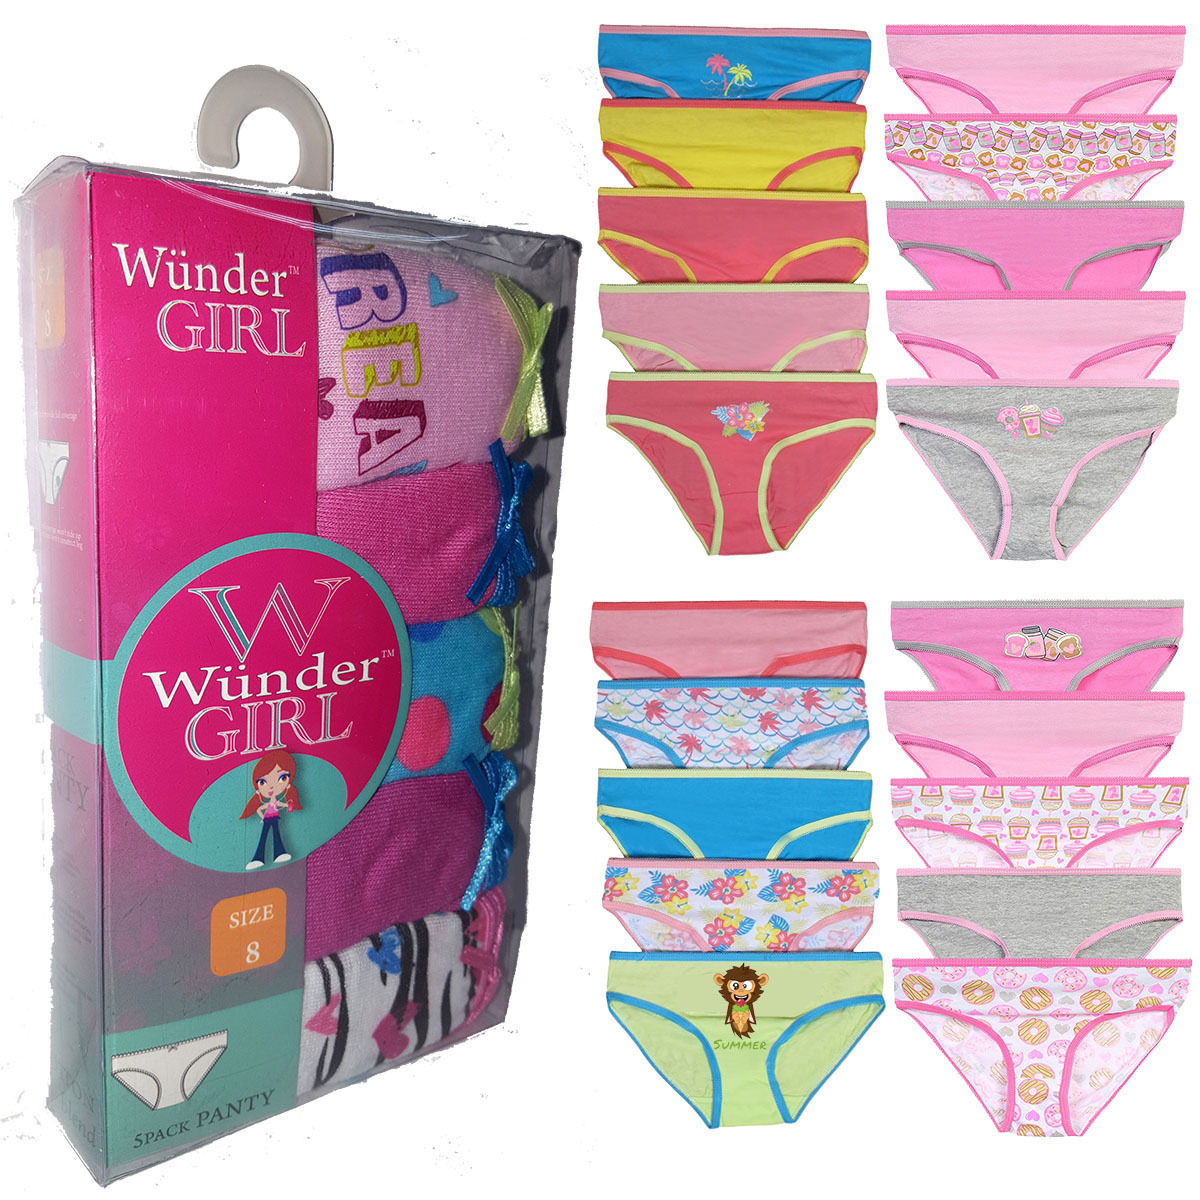 Toddler Girls' Cotton Panties - Assorted Print, Size 2T-4T, 5 Pack